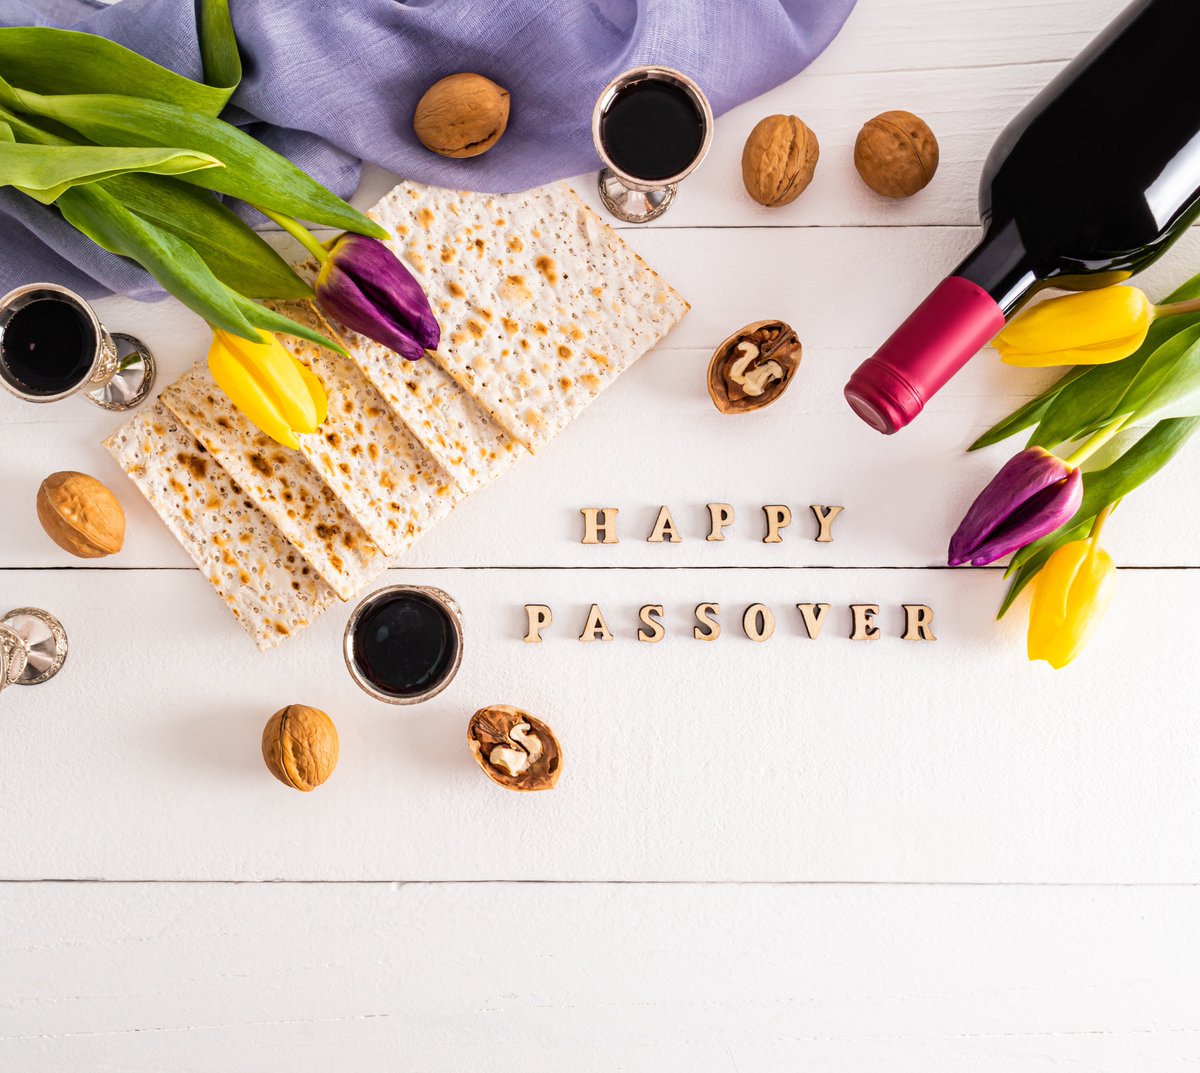 For our friends who celebrate Passover, we wish you every blessing with love, joy and hope. Happy Passover! Gut Yom Tov! Chag Sameach! #Passover #Passover2024 #signsofjoyandhope